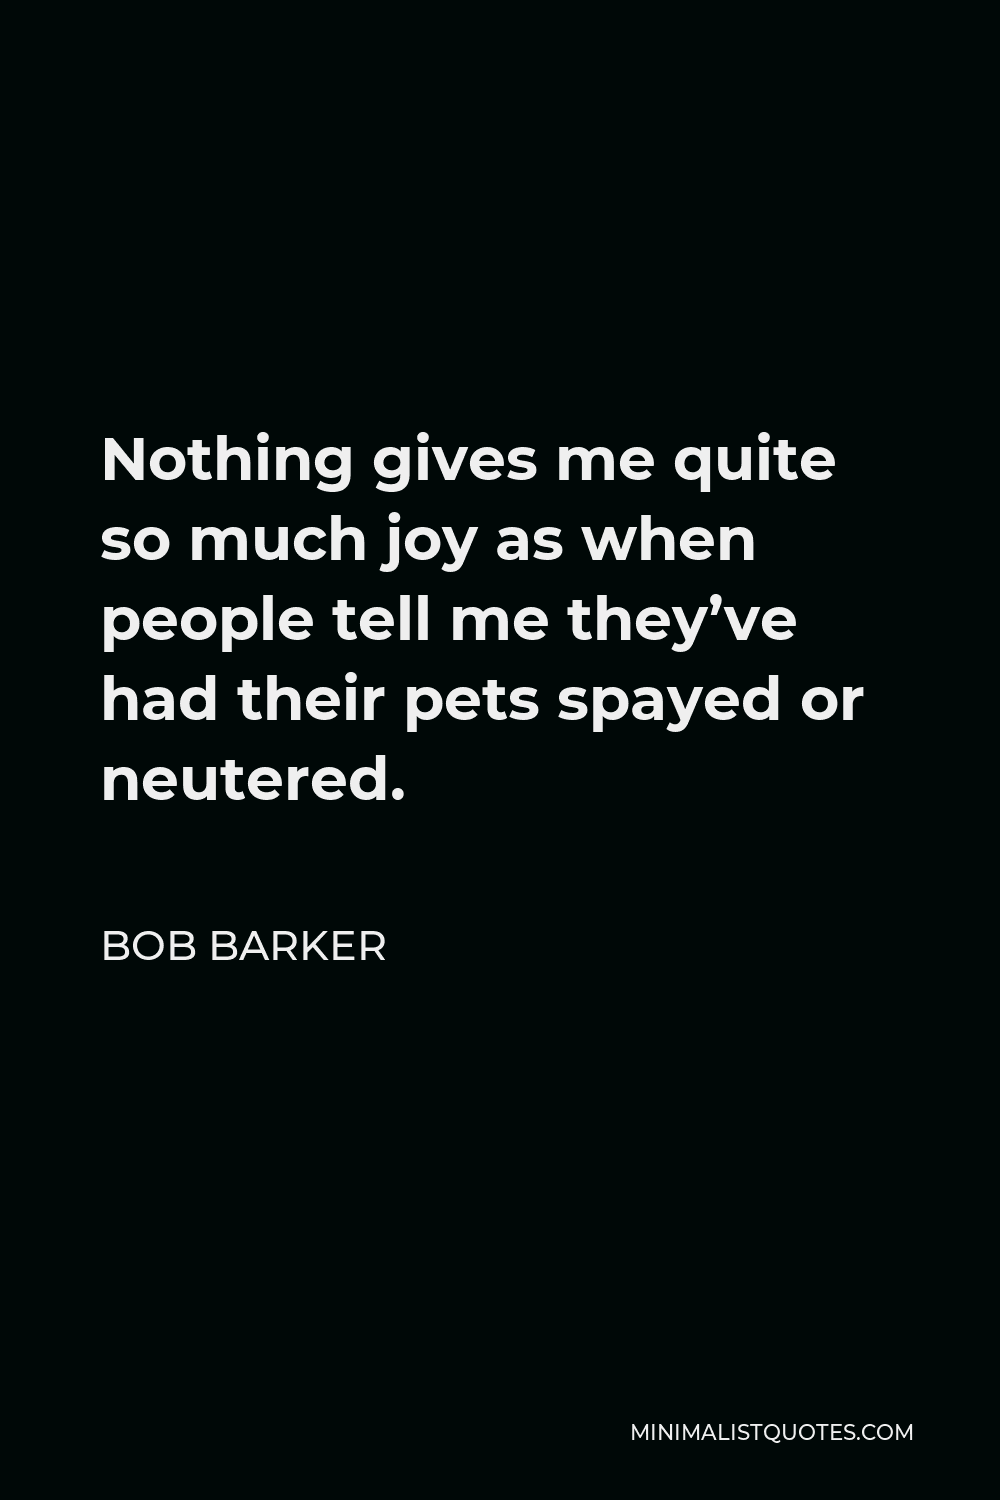 Bob Barker Quote - Nothing gives me quite so much joy as when people tell me they’ve had their pets spayed or neutered.